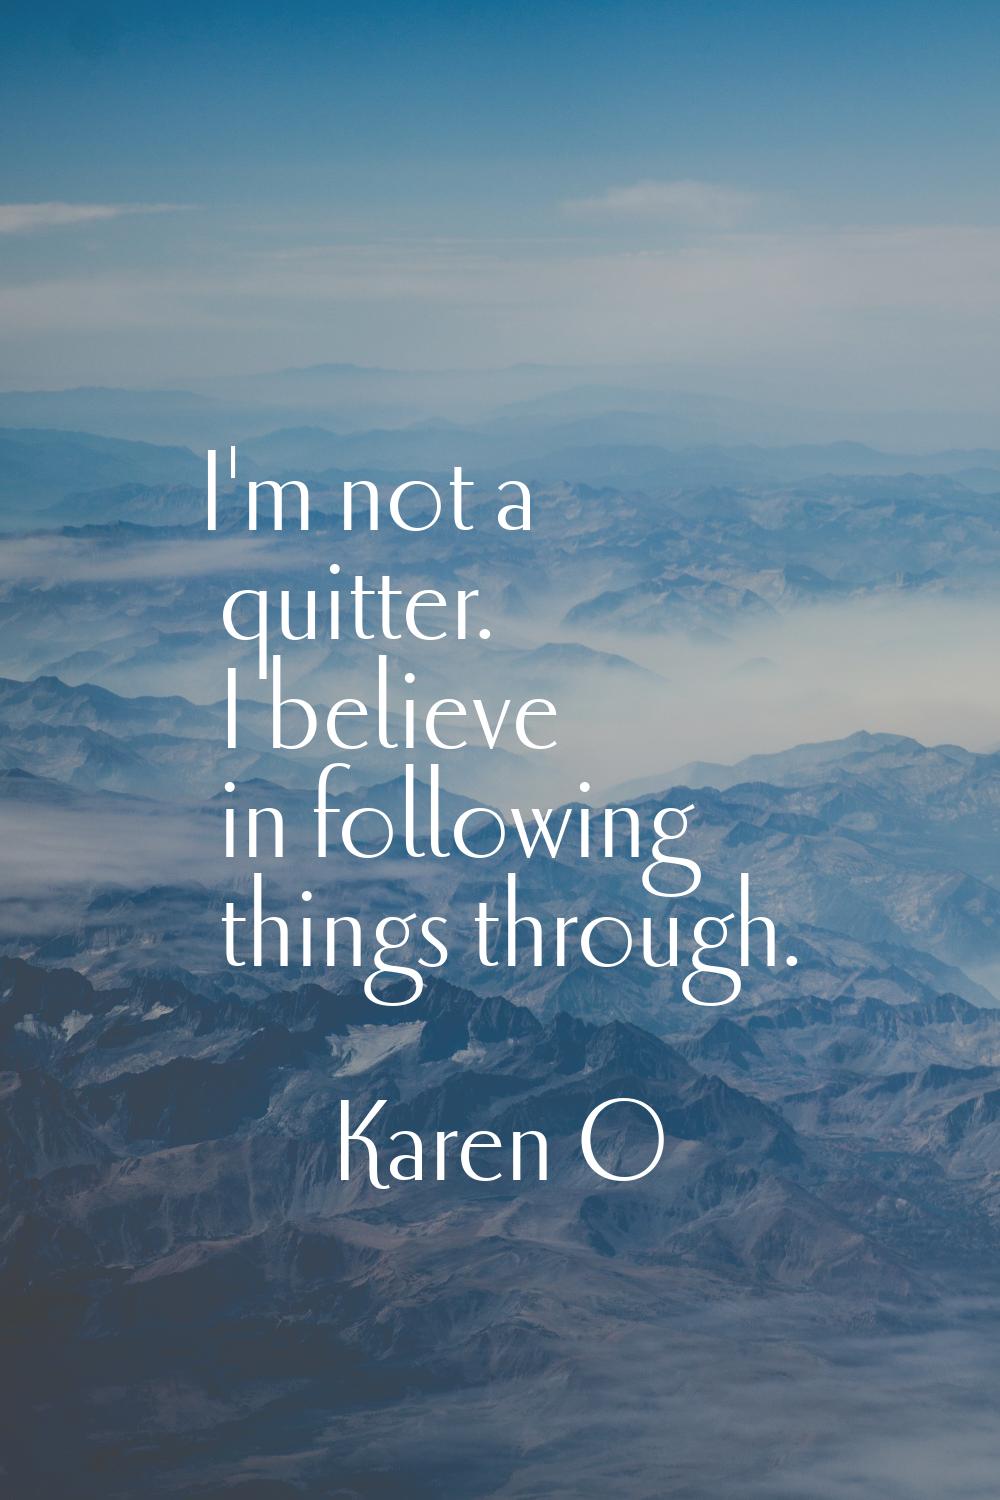 I'm not a quitter. I believe in following things through.